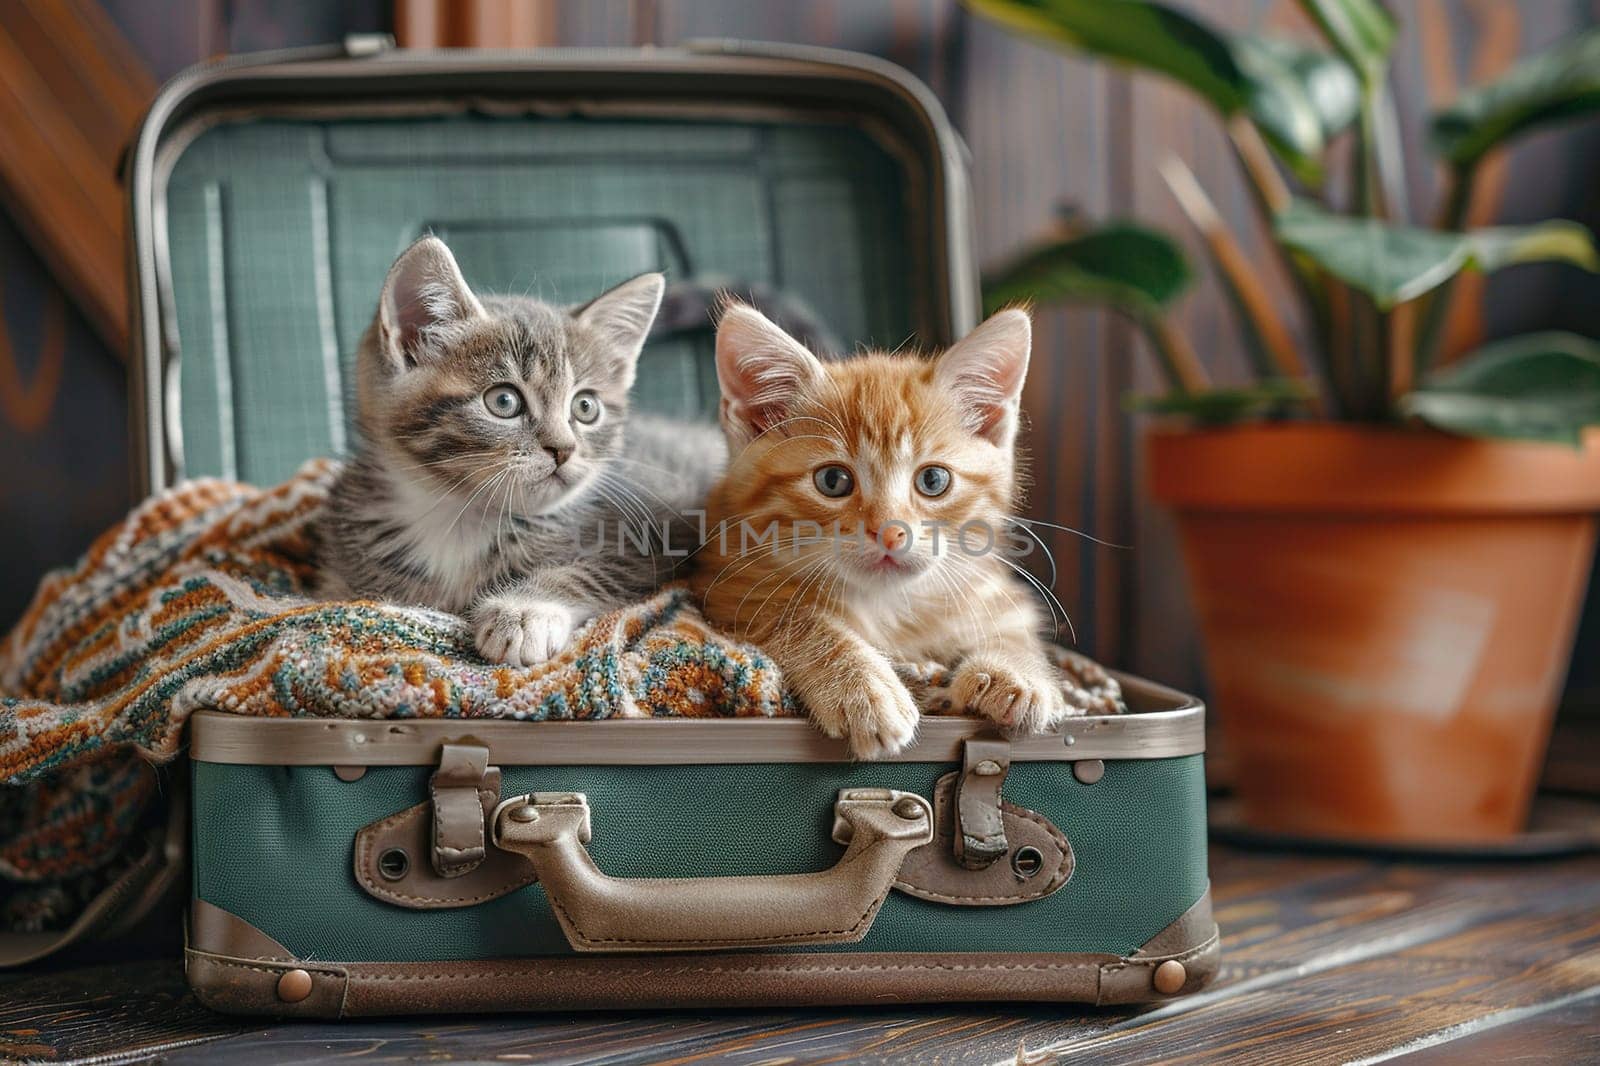 Two cute kittens are sitting in an open vintage suitcase with things. Travel, pets concept.